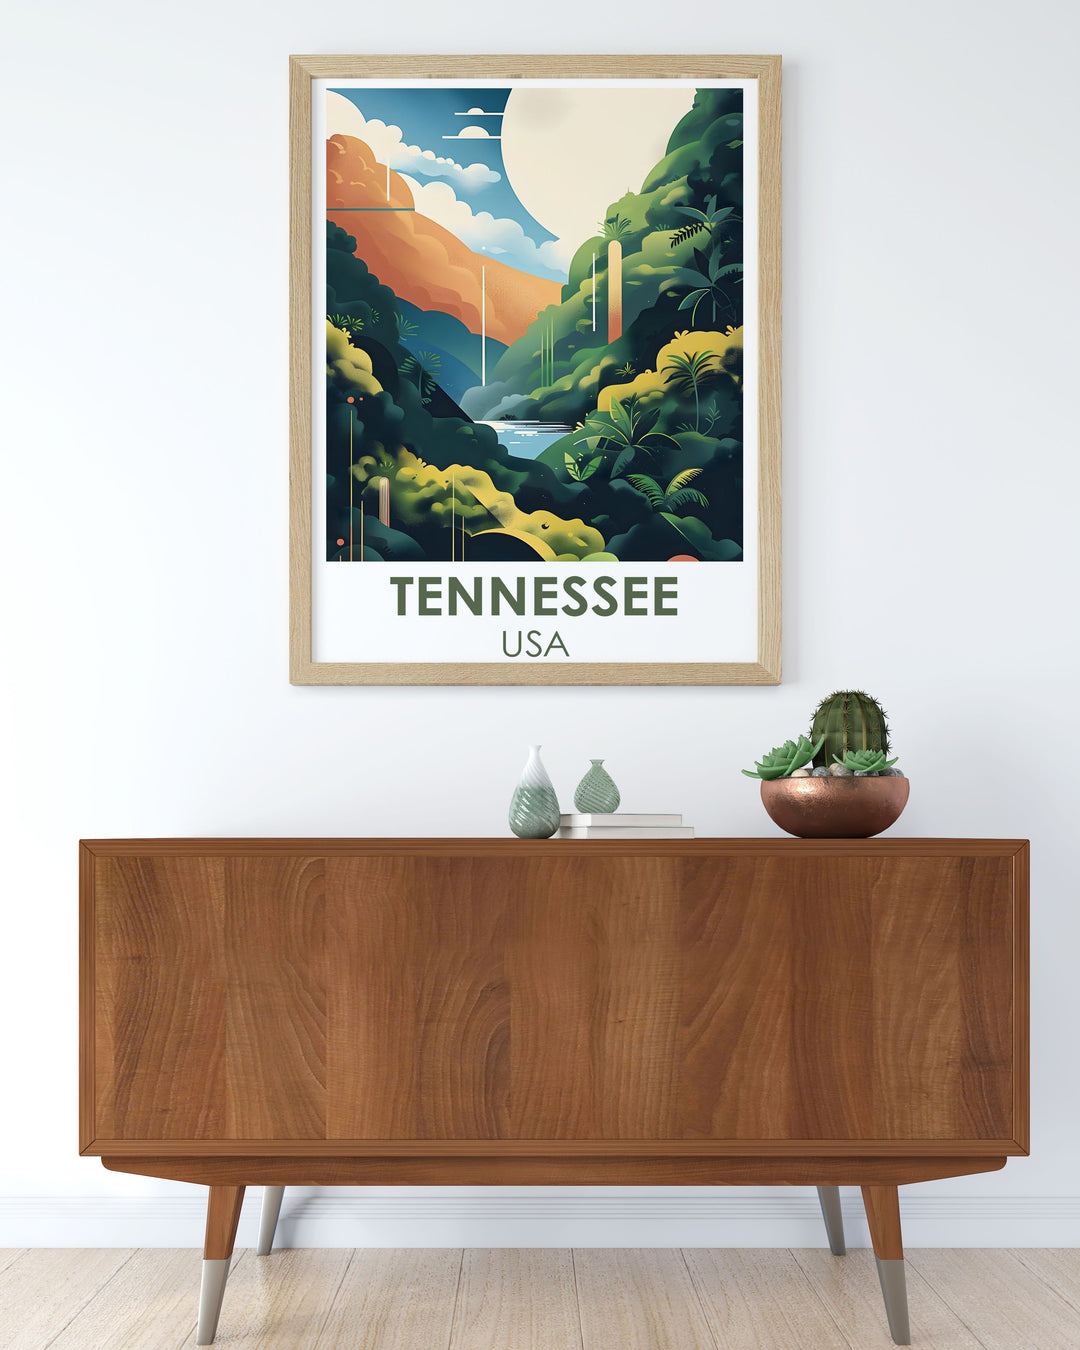 Grand Ole Opry Print with a beautiful depiction of Nashville Tennessees Ryman Auditorium and the tranquil scenes of Great Smoky Mountains National Park. Ideal for adding a touch of musical and natural charm to your home decor.